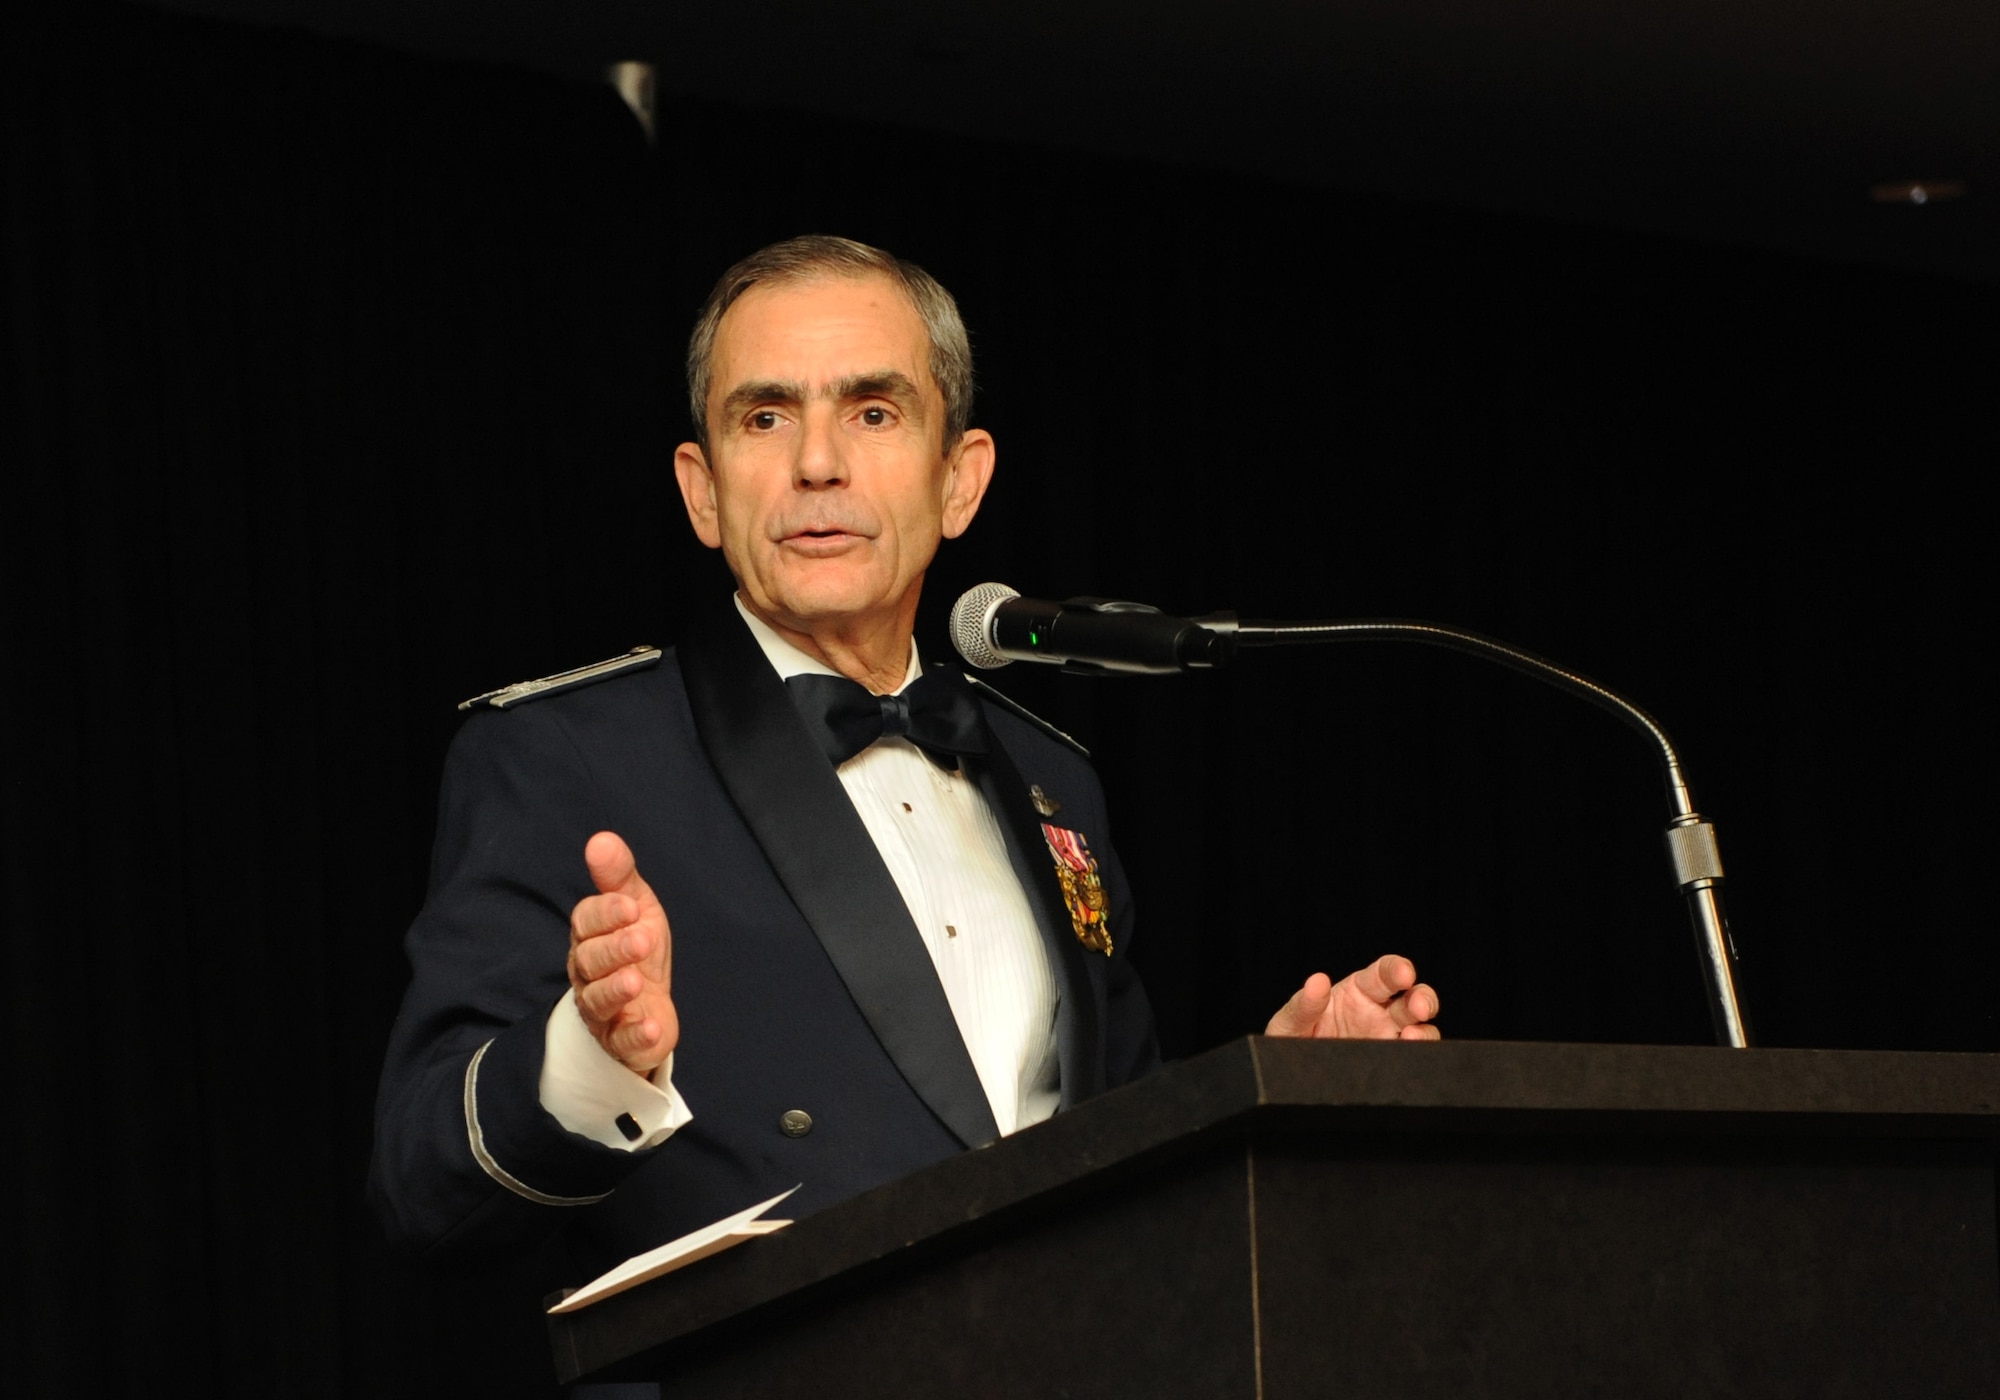 Retired Col. Leon Ellis delivers gives remarks as the guest speaker during the Keesler Air Force Ball at the Imperial Palace Casino Sept. 24, 2016, Biloxi, Miss. The event was sponsored by the Air Force Association John C. Stennis Chapter #332 to celebrate the Air Force’s 69th birthday and the base’s 75th anniversary. Ellis served in the Air Force for 25 years and is a Purple Heart recipient. (U.S. Air Force photo by Kemberly Groue/Released)